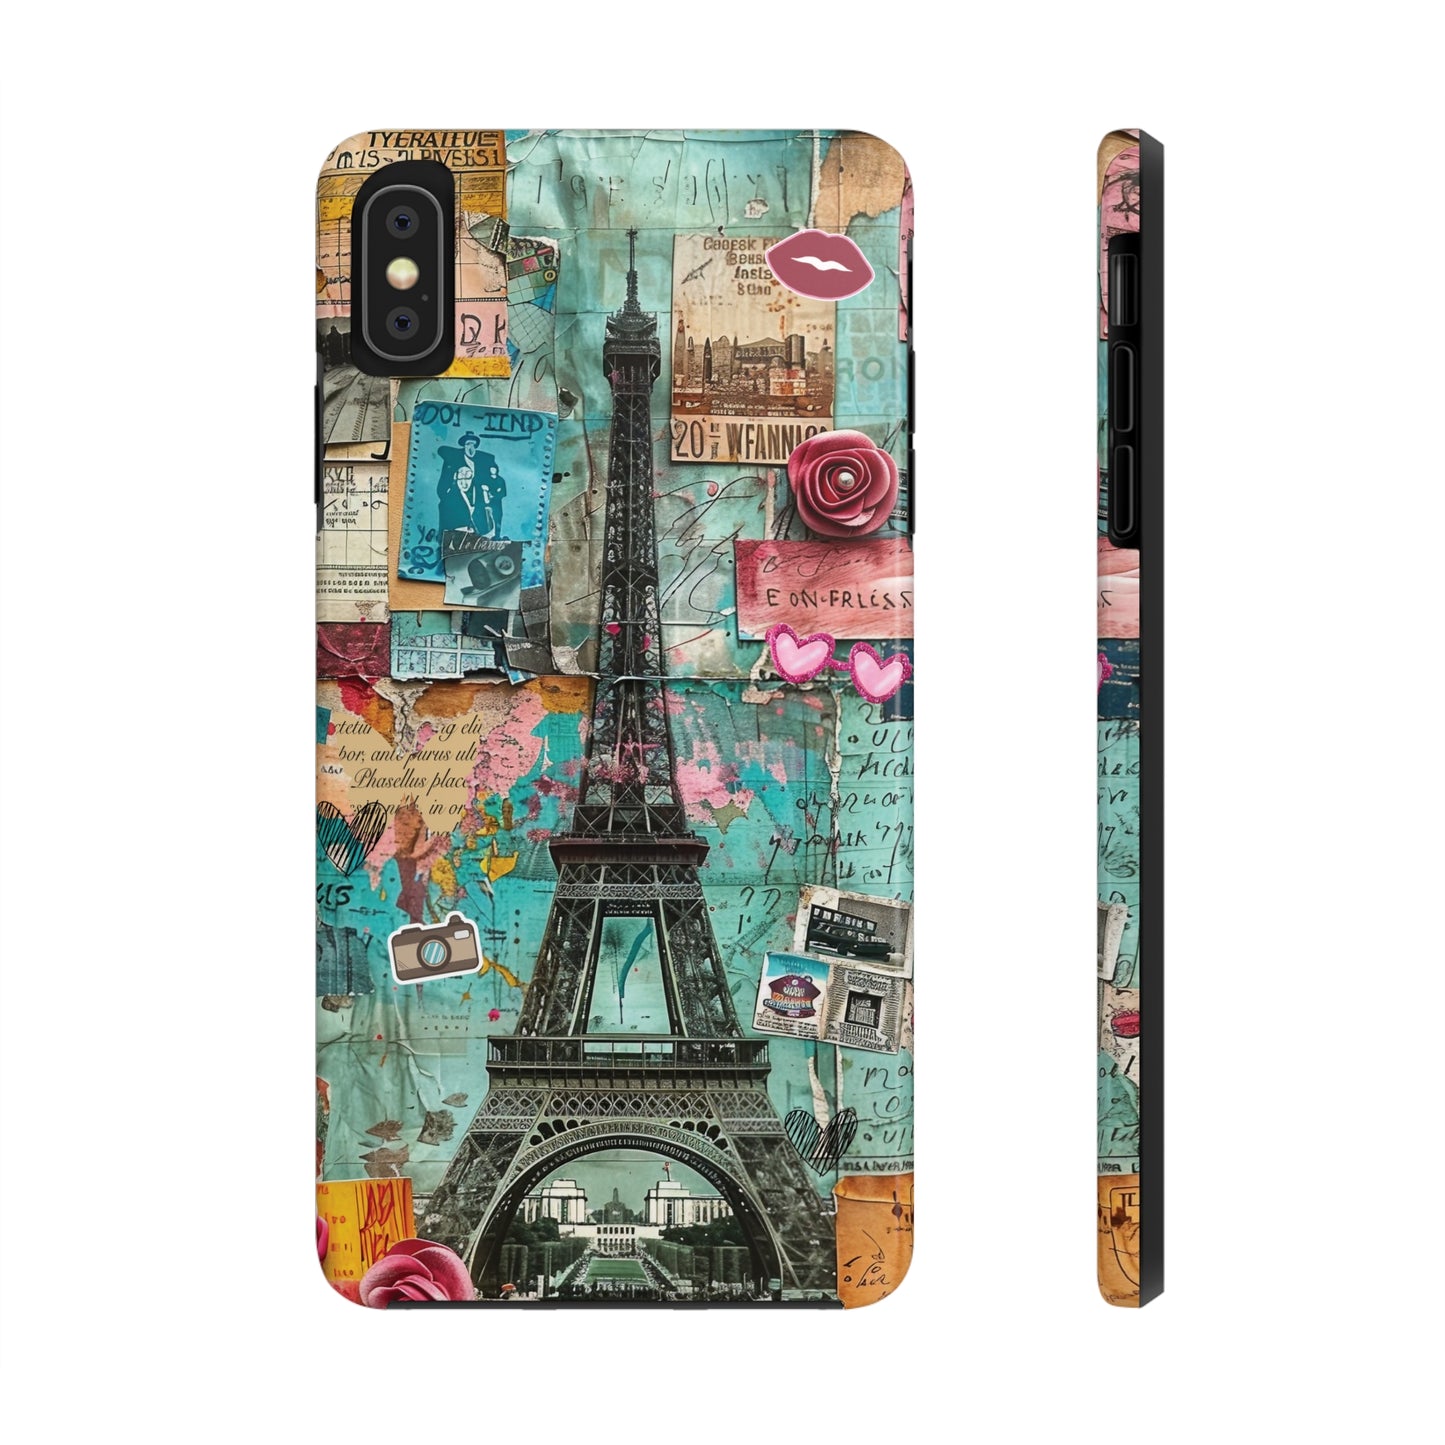 Vintage Paris Eiffel Tower Collage iPhone Case, Chic Artsy Travel Themed Protective Cover, Protective Case for iPhone Models, Tough iPhone Case